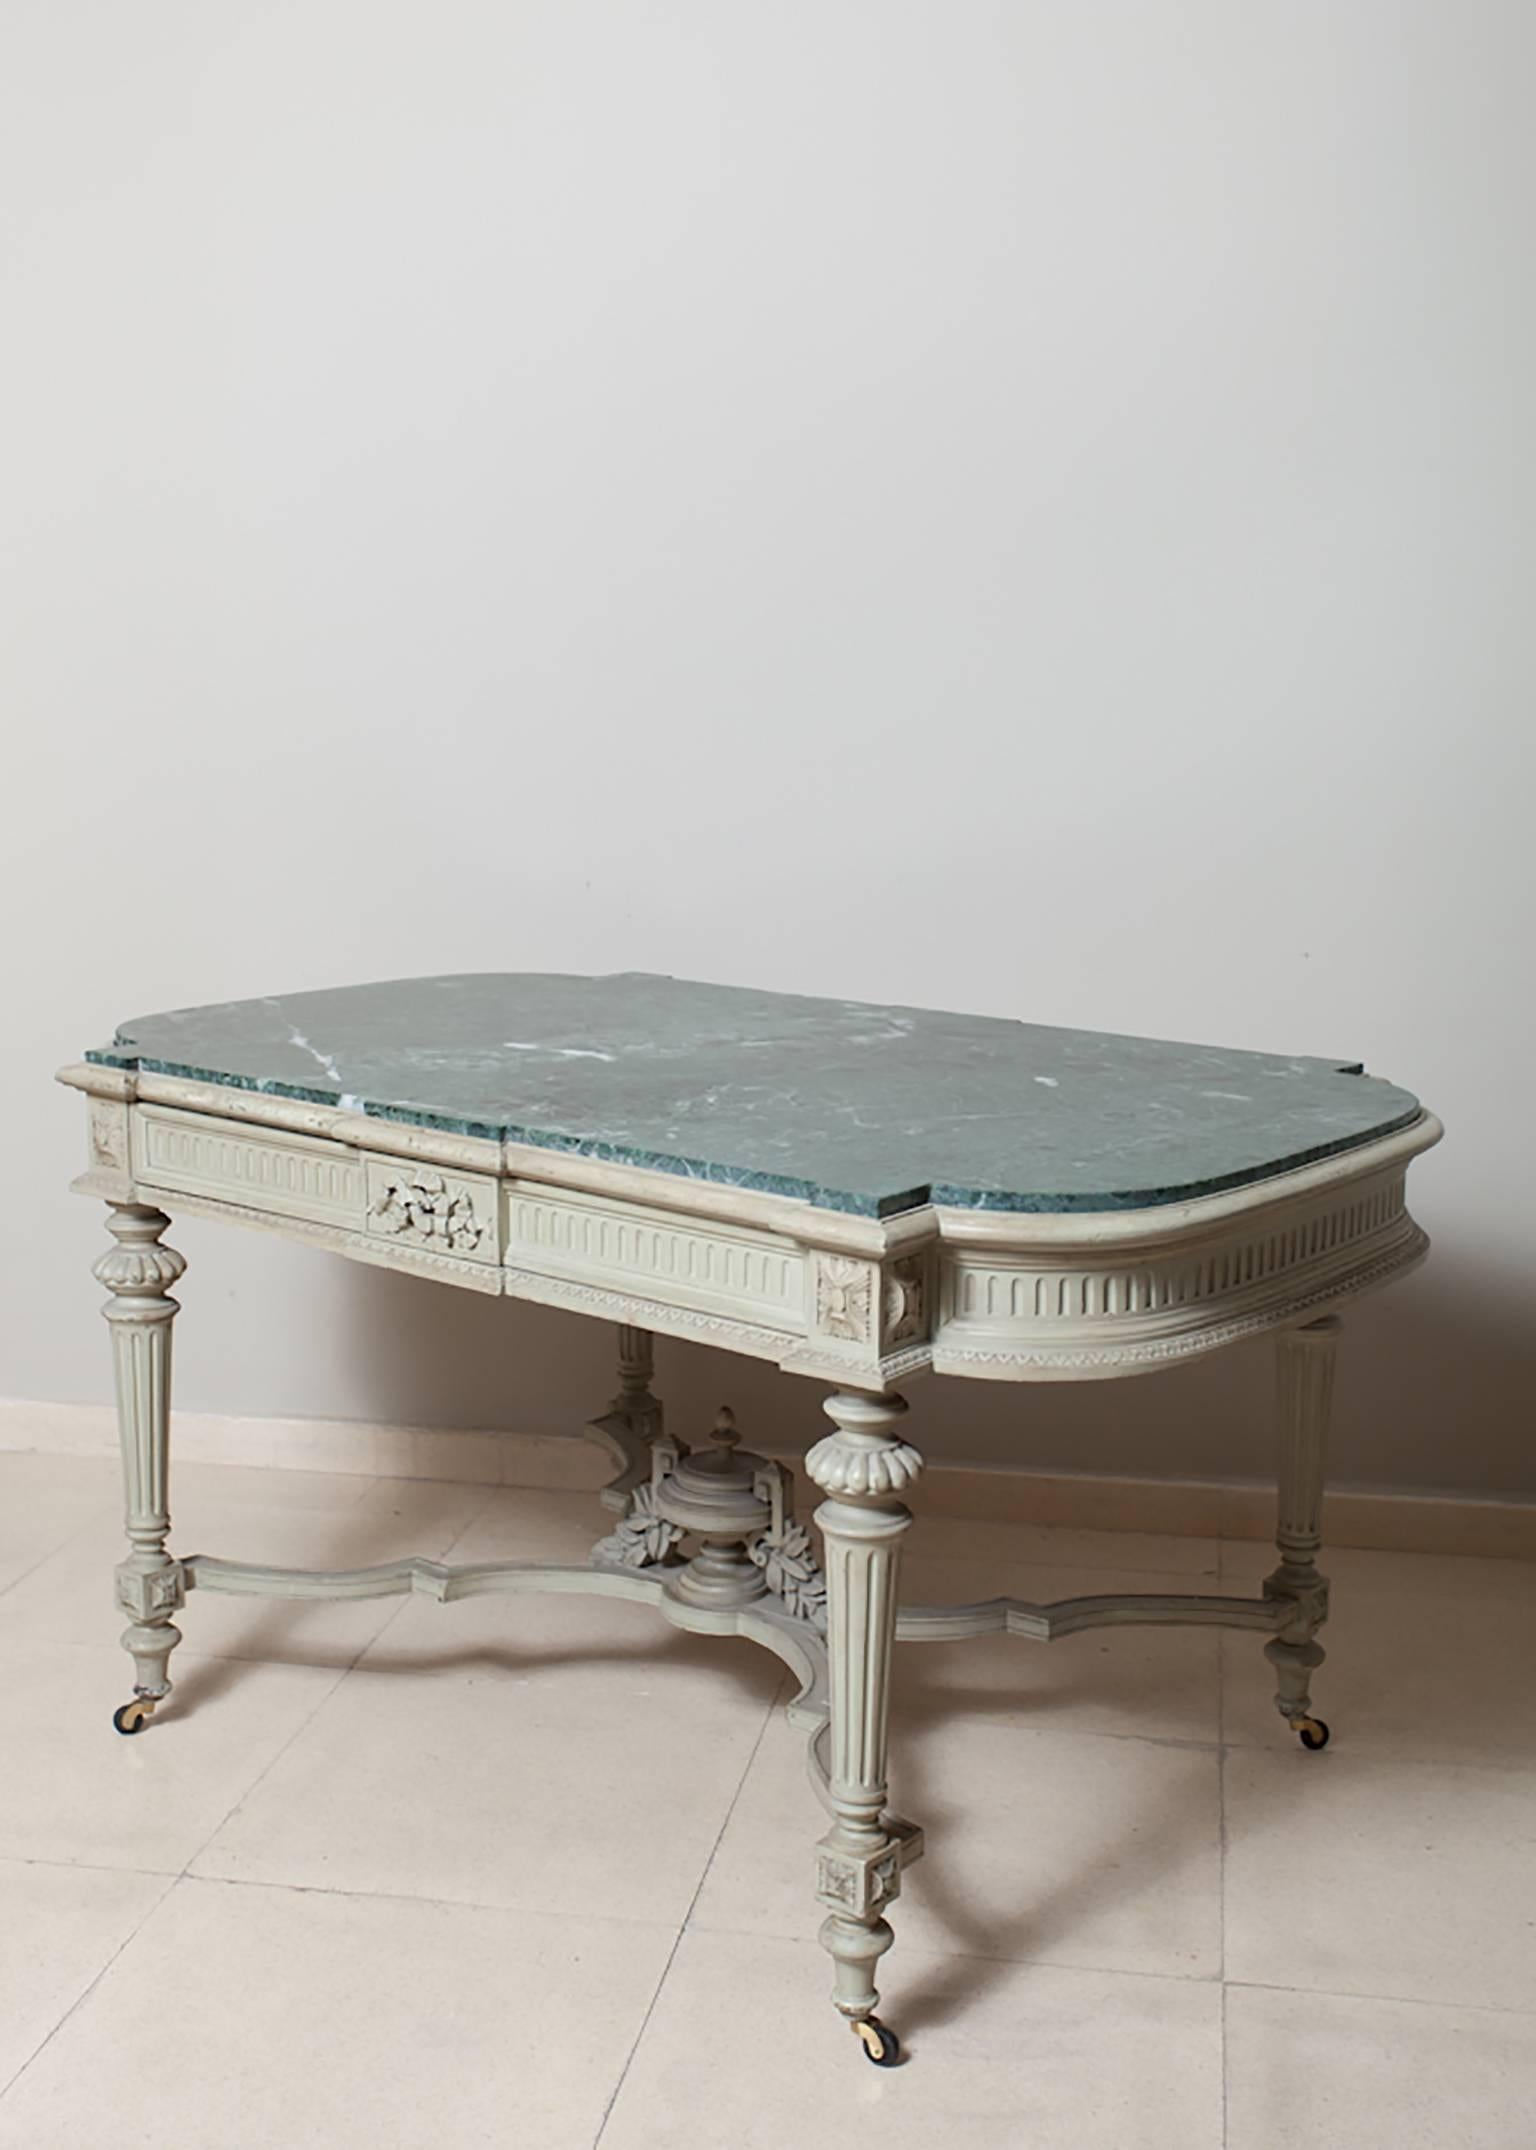 Louis XVI style centre table or desk. Painted in green-grey with marble top half inset, in green color too and a single large drawer. Detailing hand carved details.